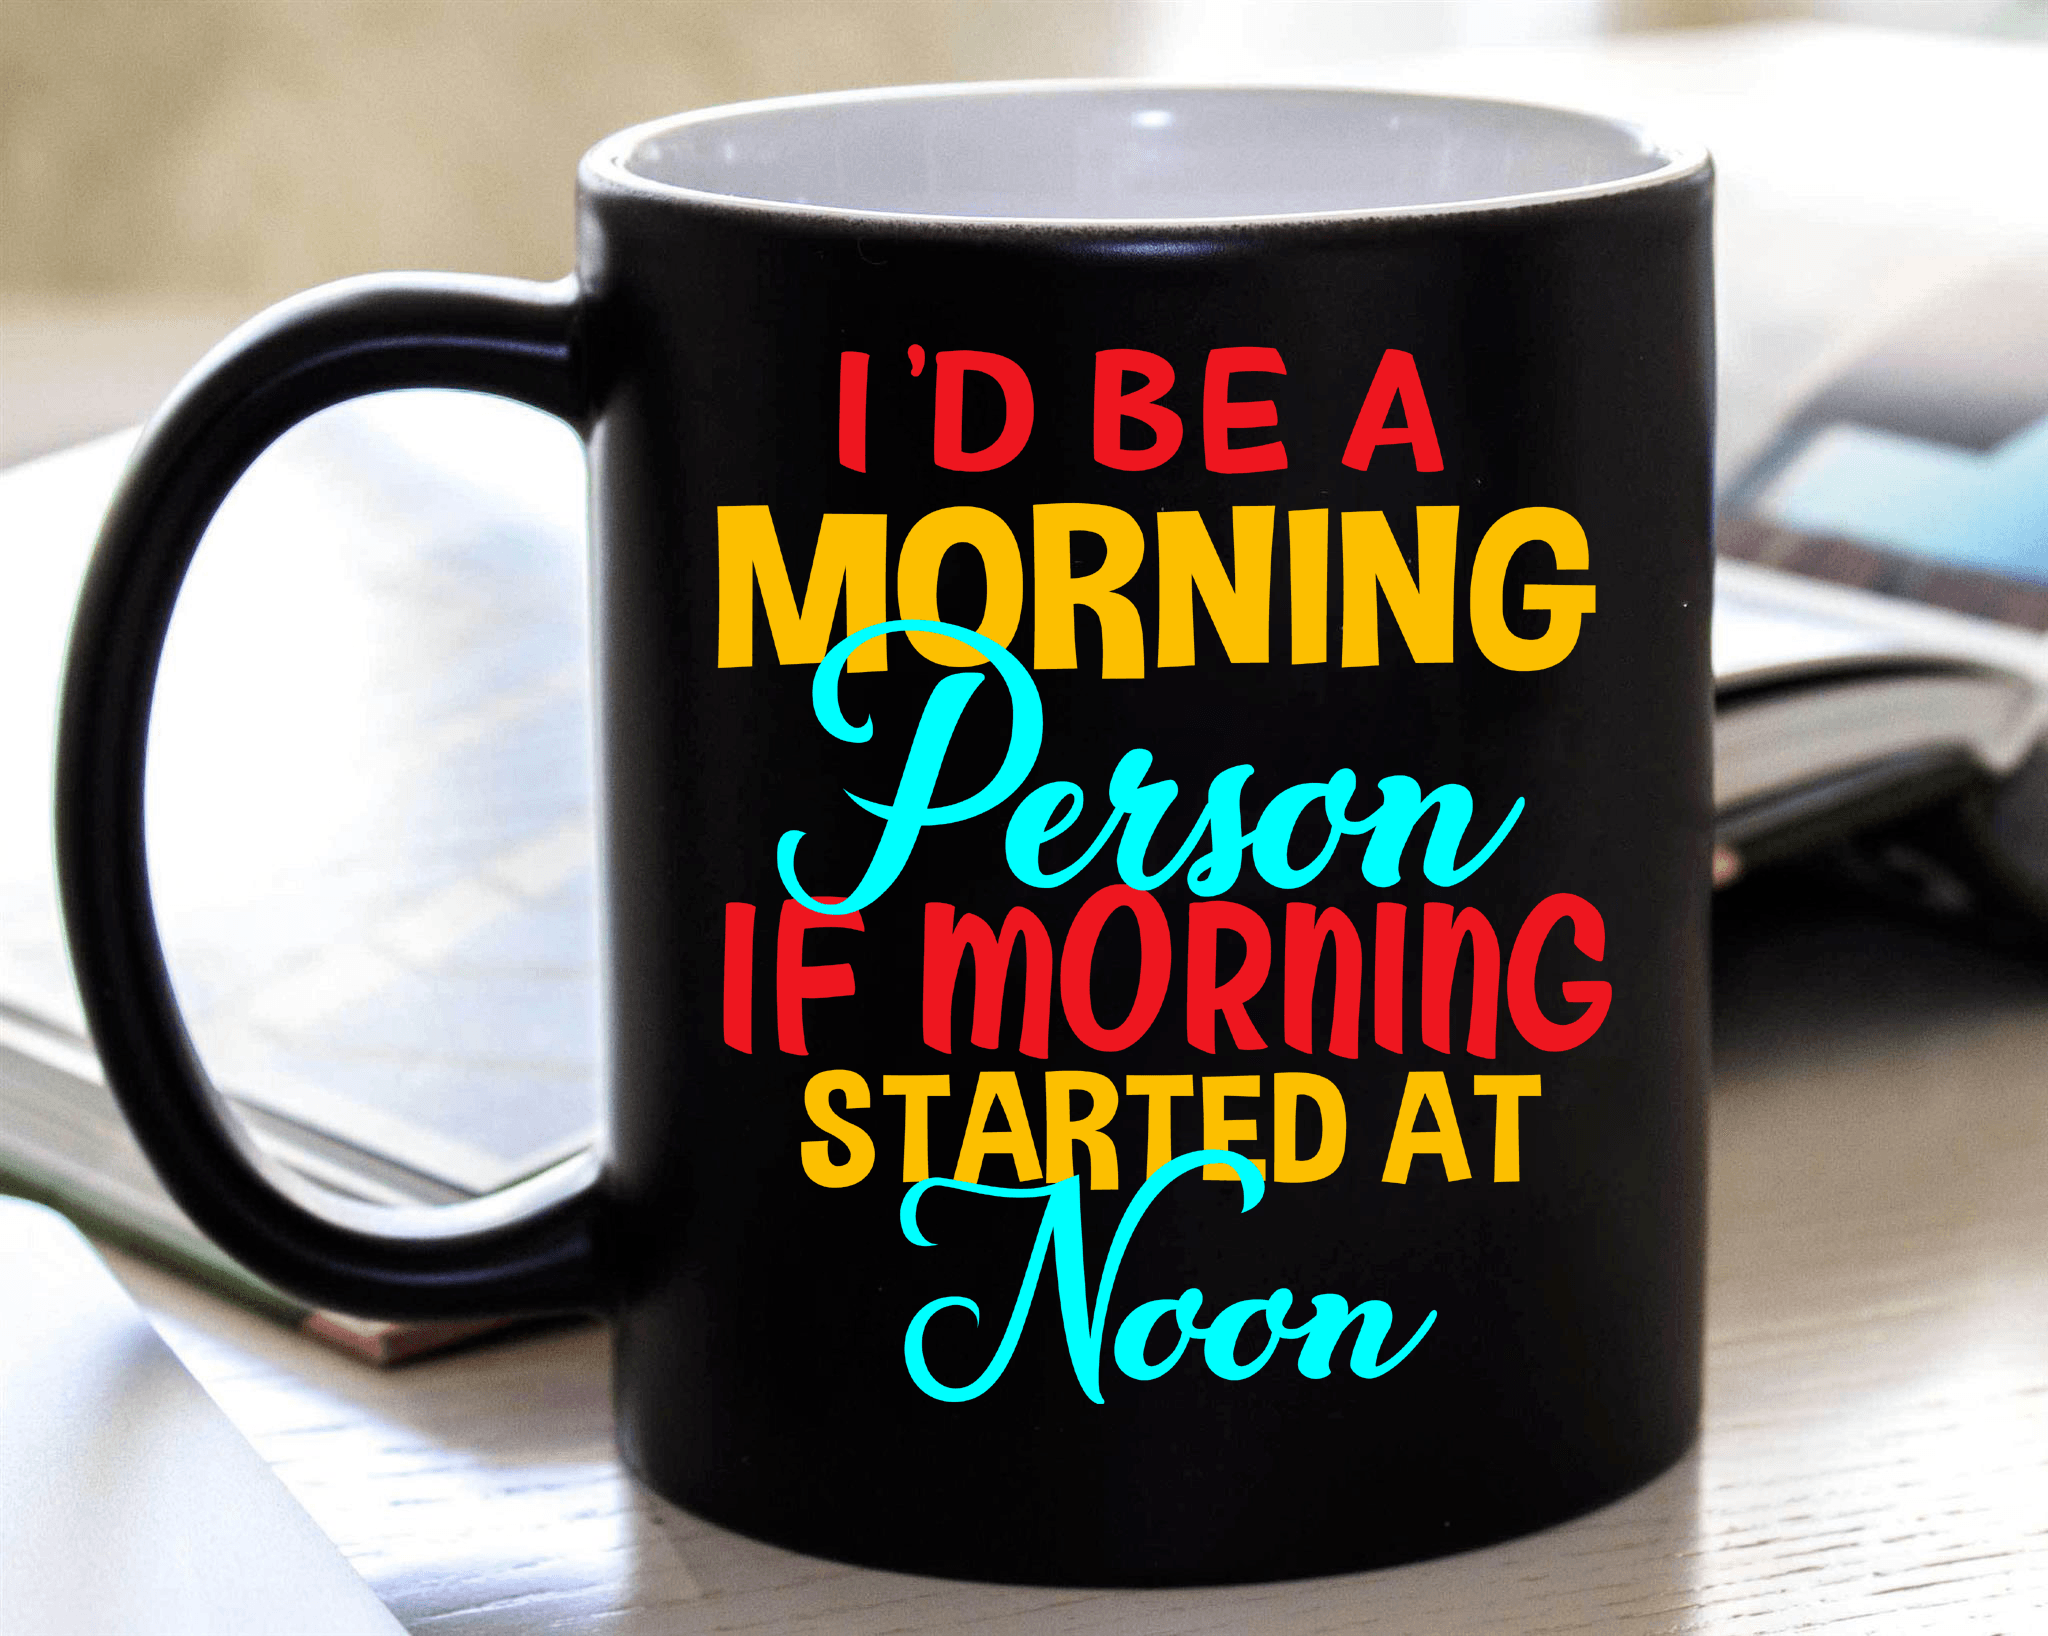 "I'd Be A Morning Person If Morning Started At Noon" MUG .